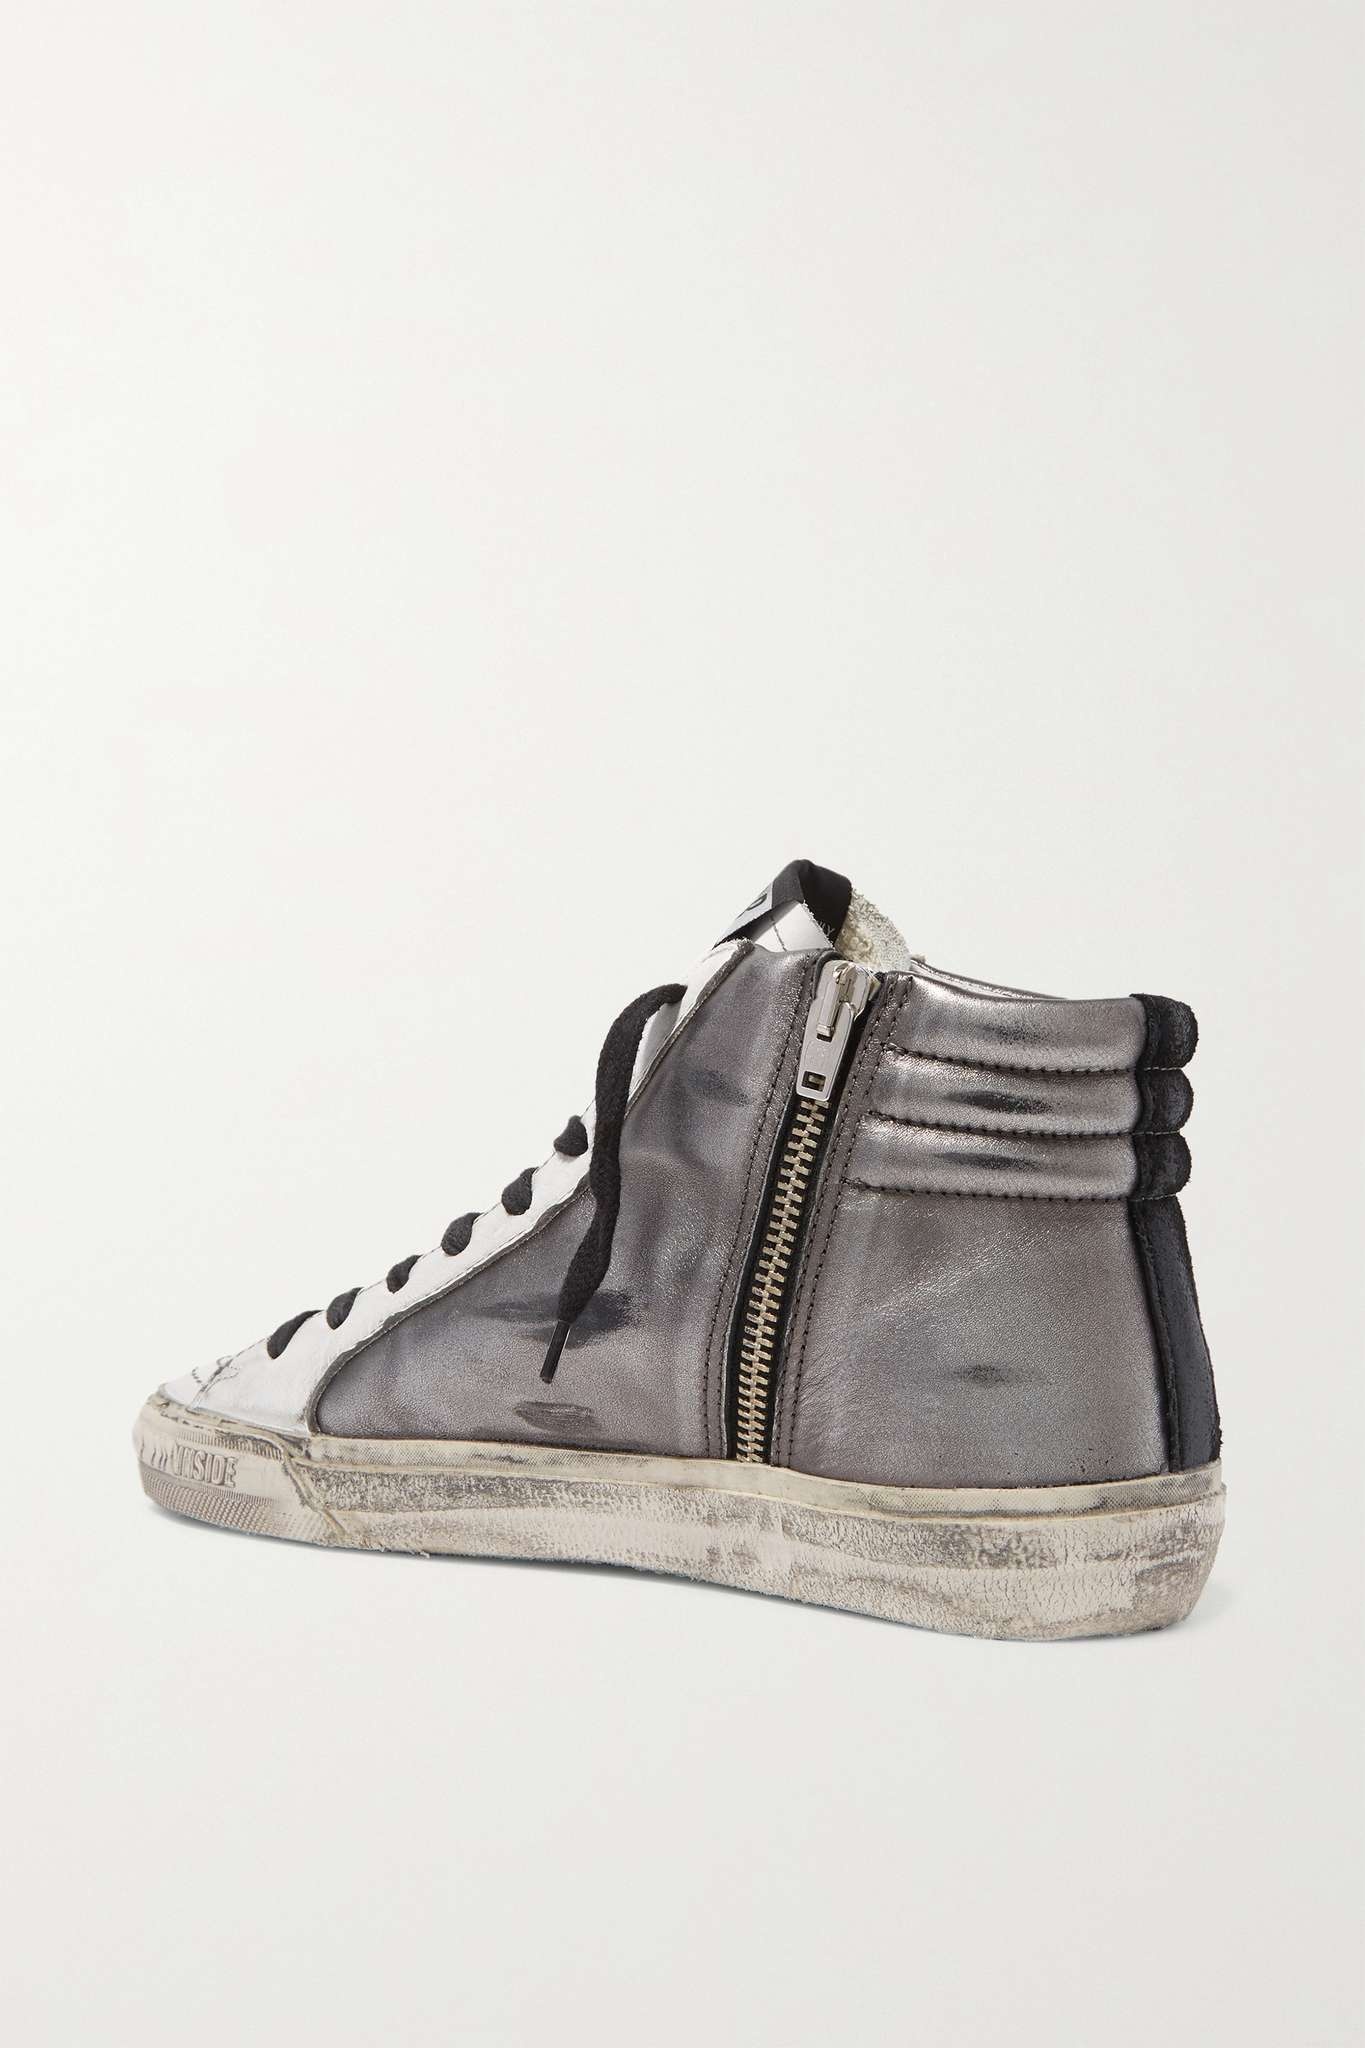 Slide distressed suede-trimmed leather and Lurex high-top sneakers - 3